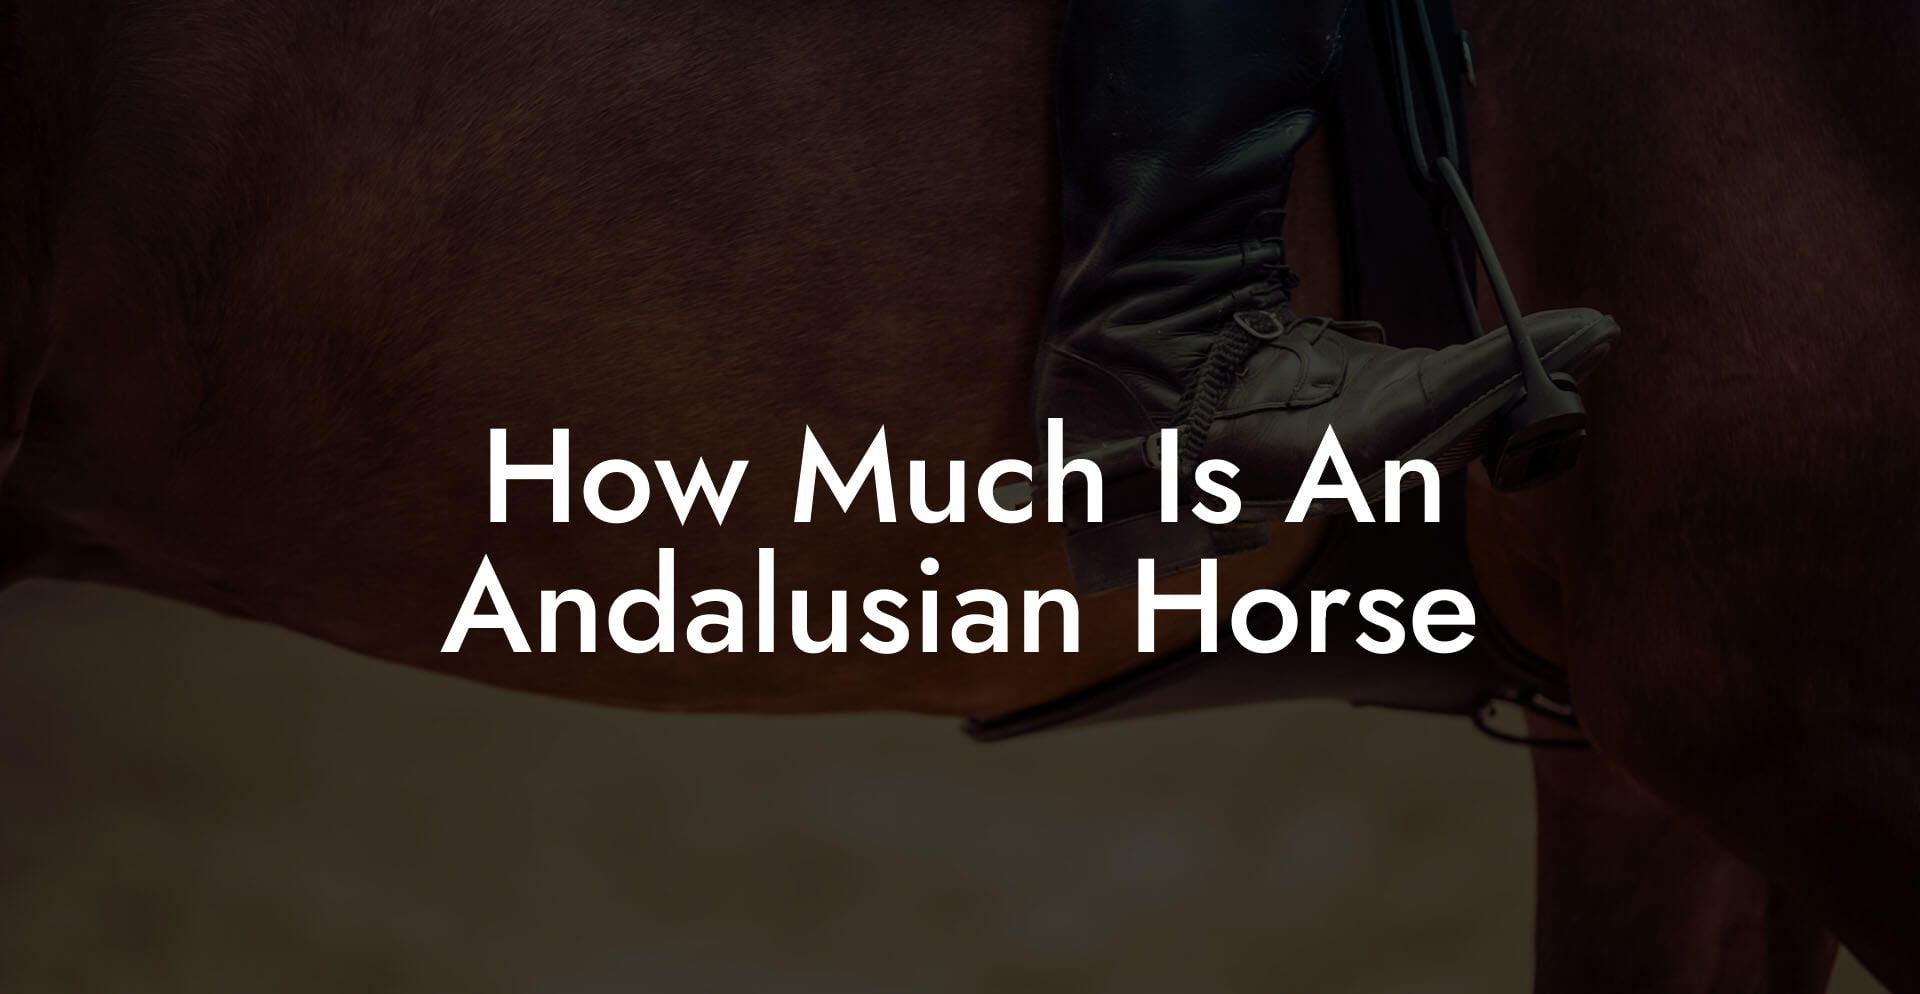 How Much Is An Andalusian Horse